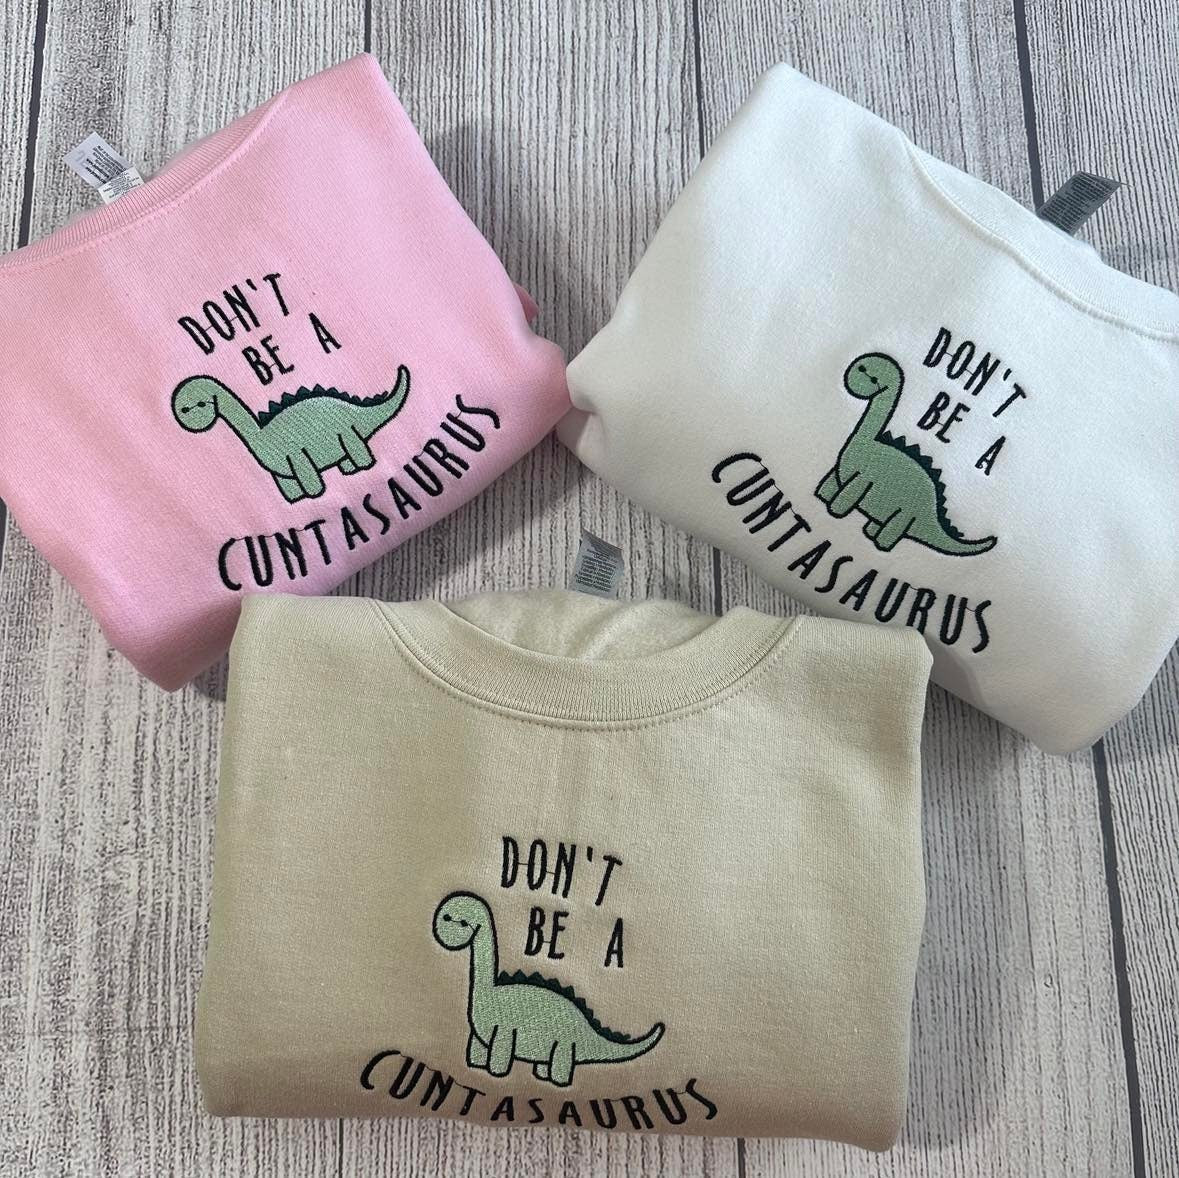 Don't be a cuntasaurus Embroidered sweatshirt; Dinosaurs Embroidery crewneck: funny crewneck; funny dinosaurs - MrEmbroideryGifts